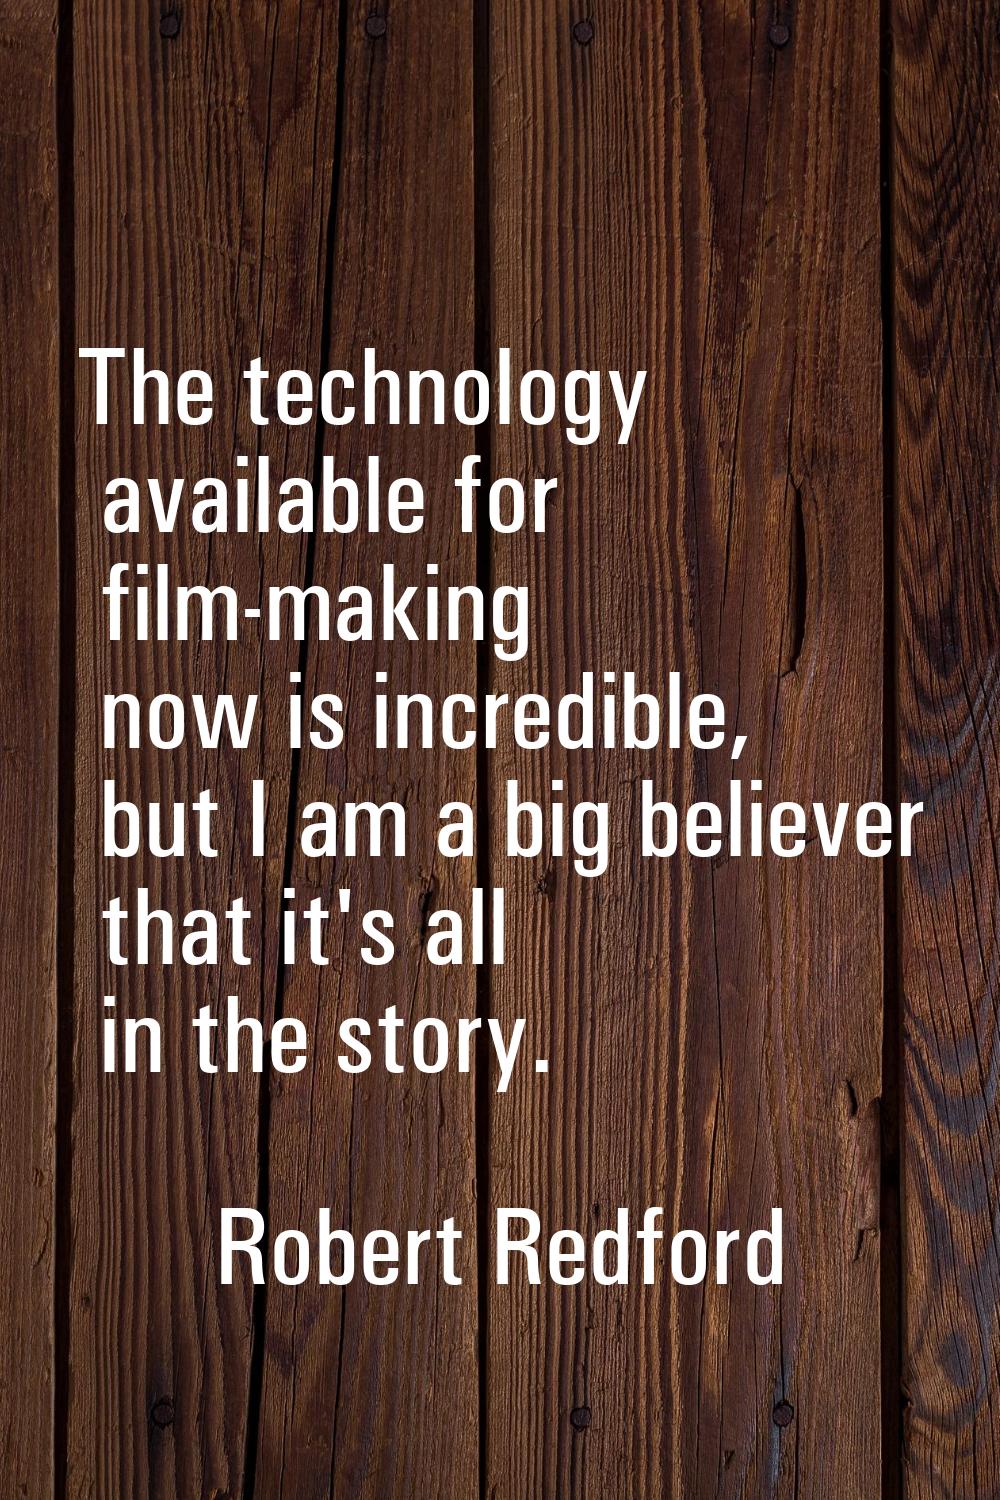 The technology available for film-making now is incredible, but I am a big believer that it's all i